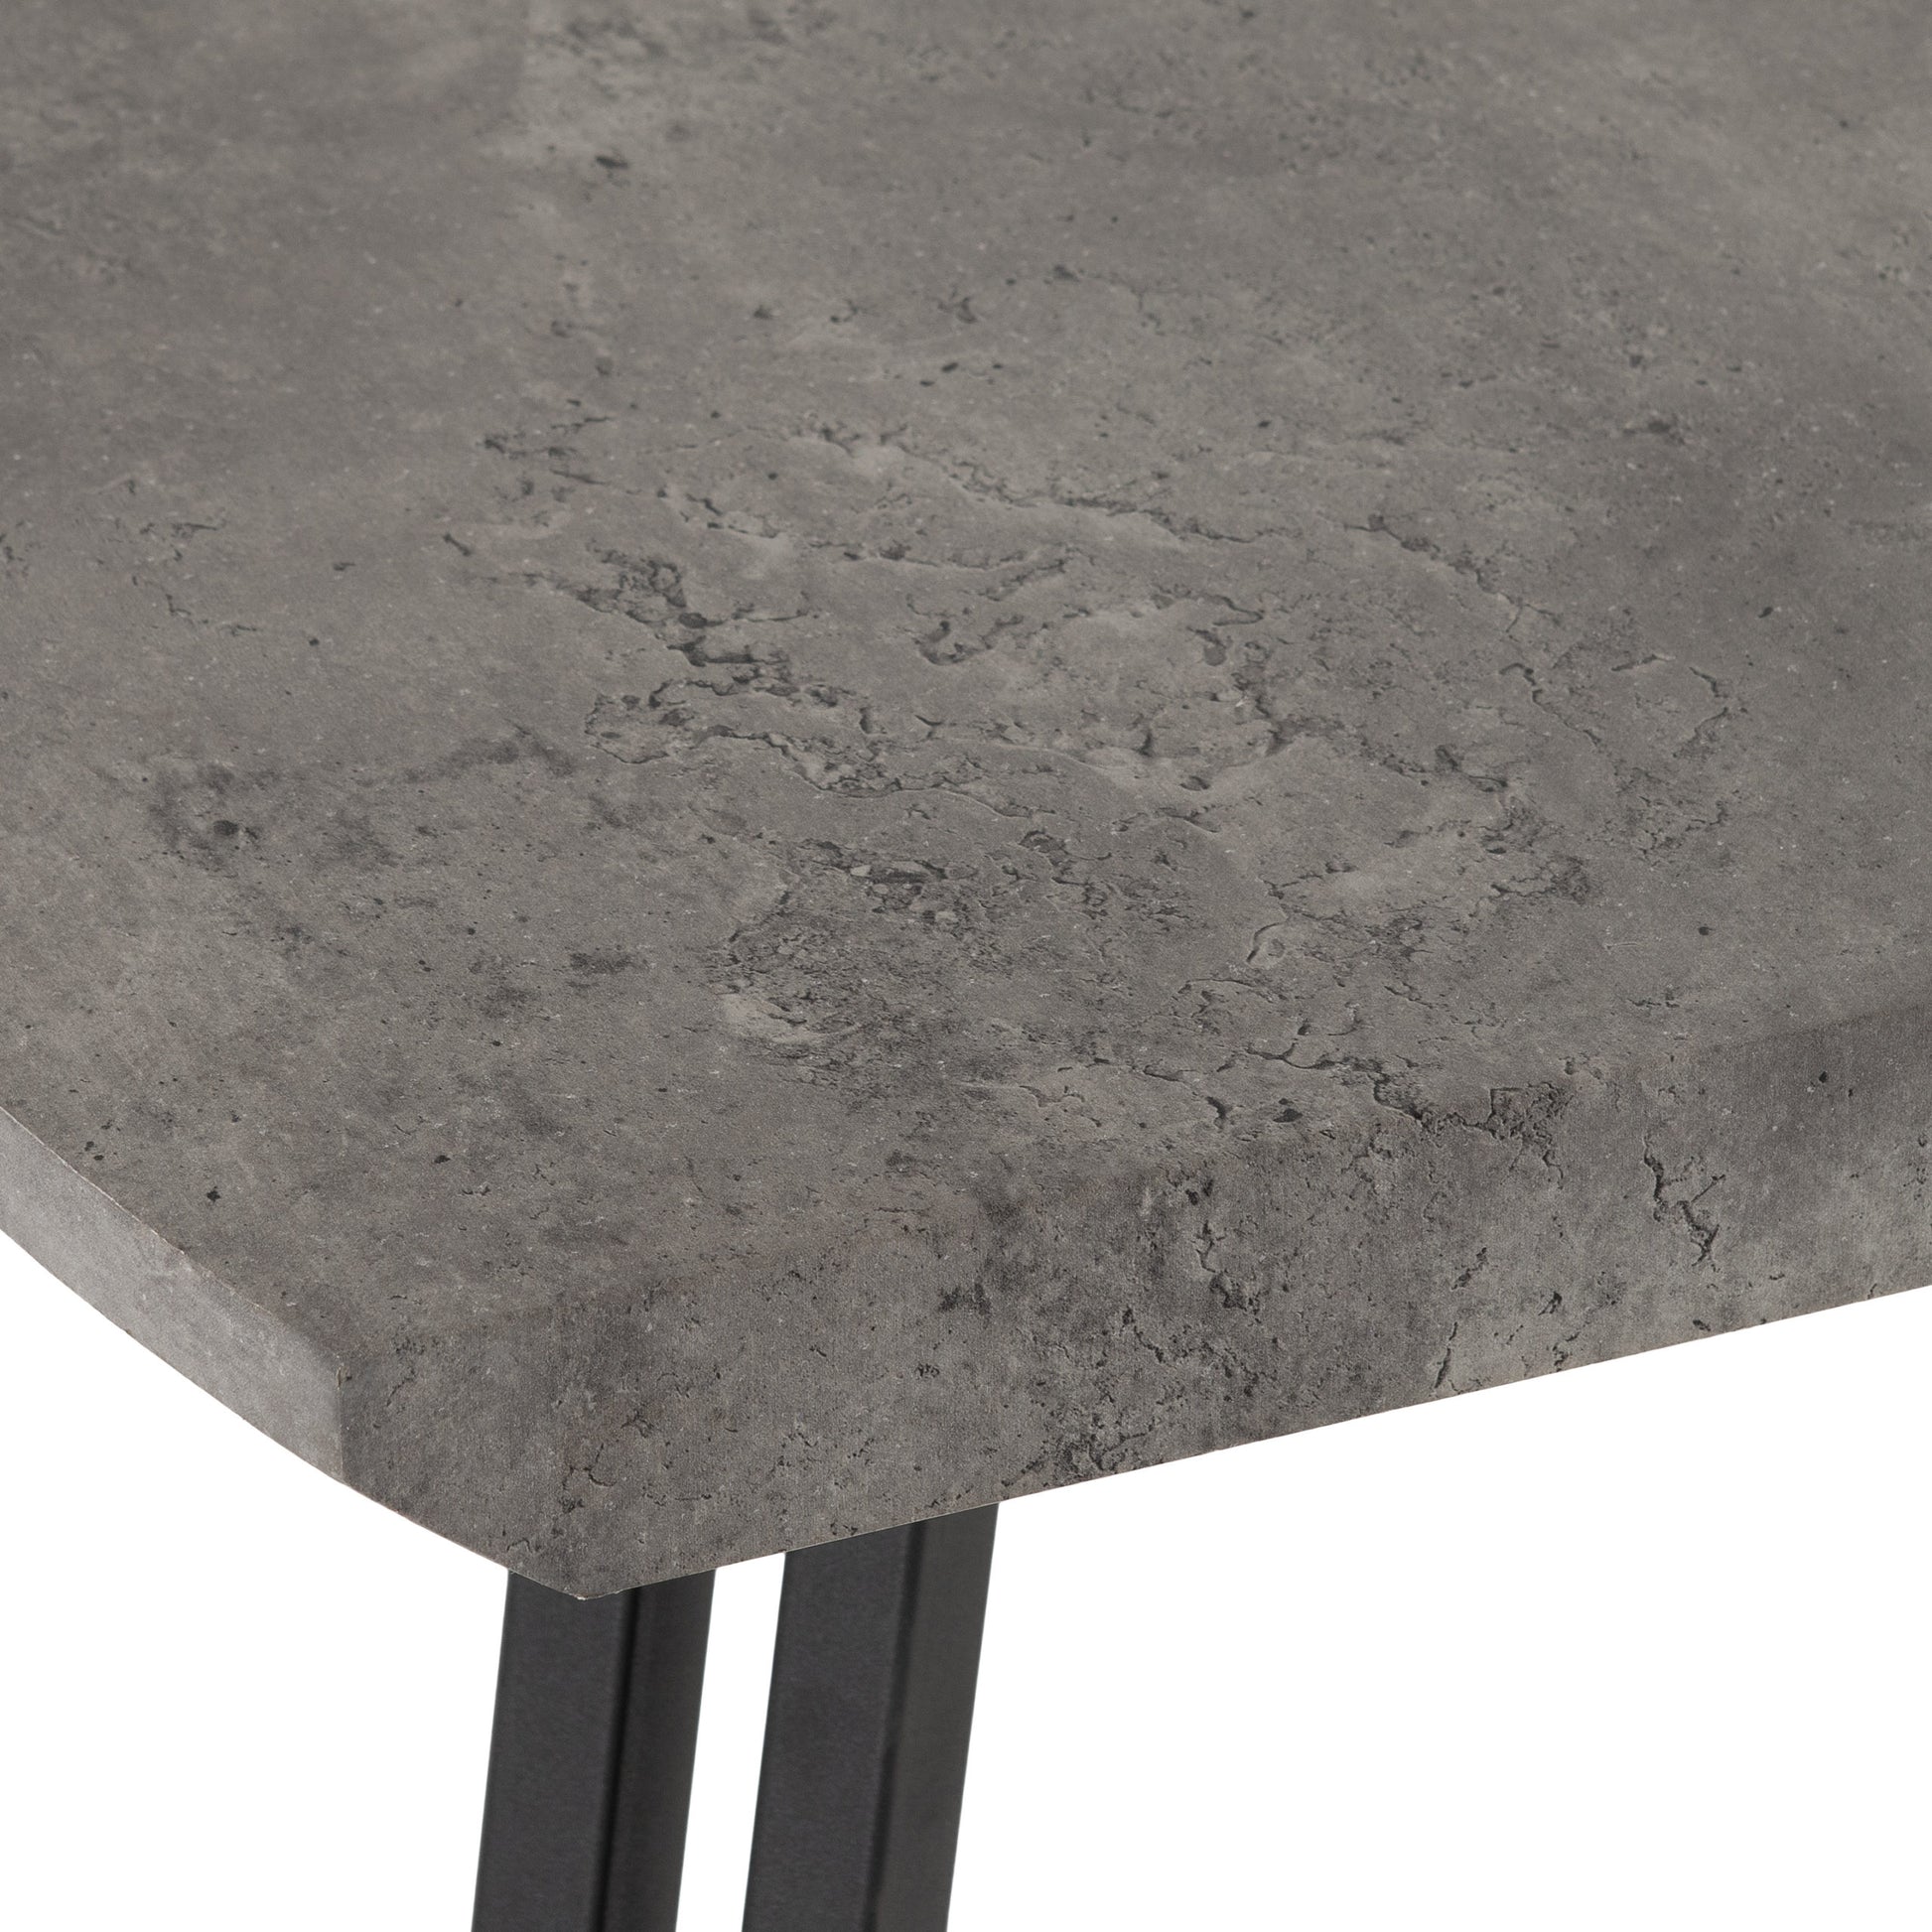 QUEBEC-WAVE-EDGE-DINING-TABLE-CONCRETE-EFFECT-2021-400-403-057-01-scaled.jpg